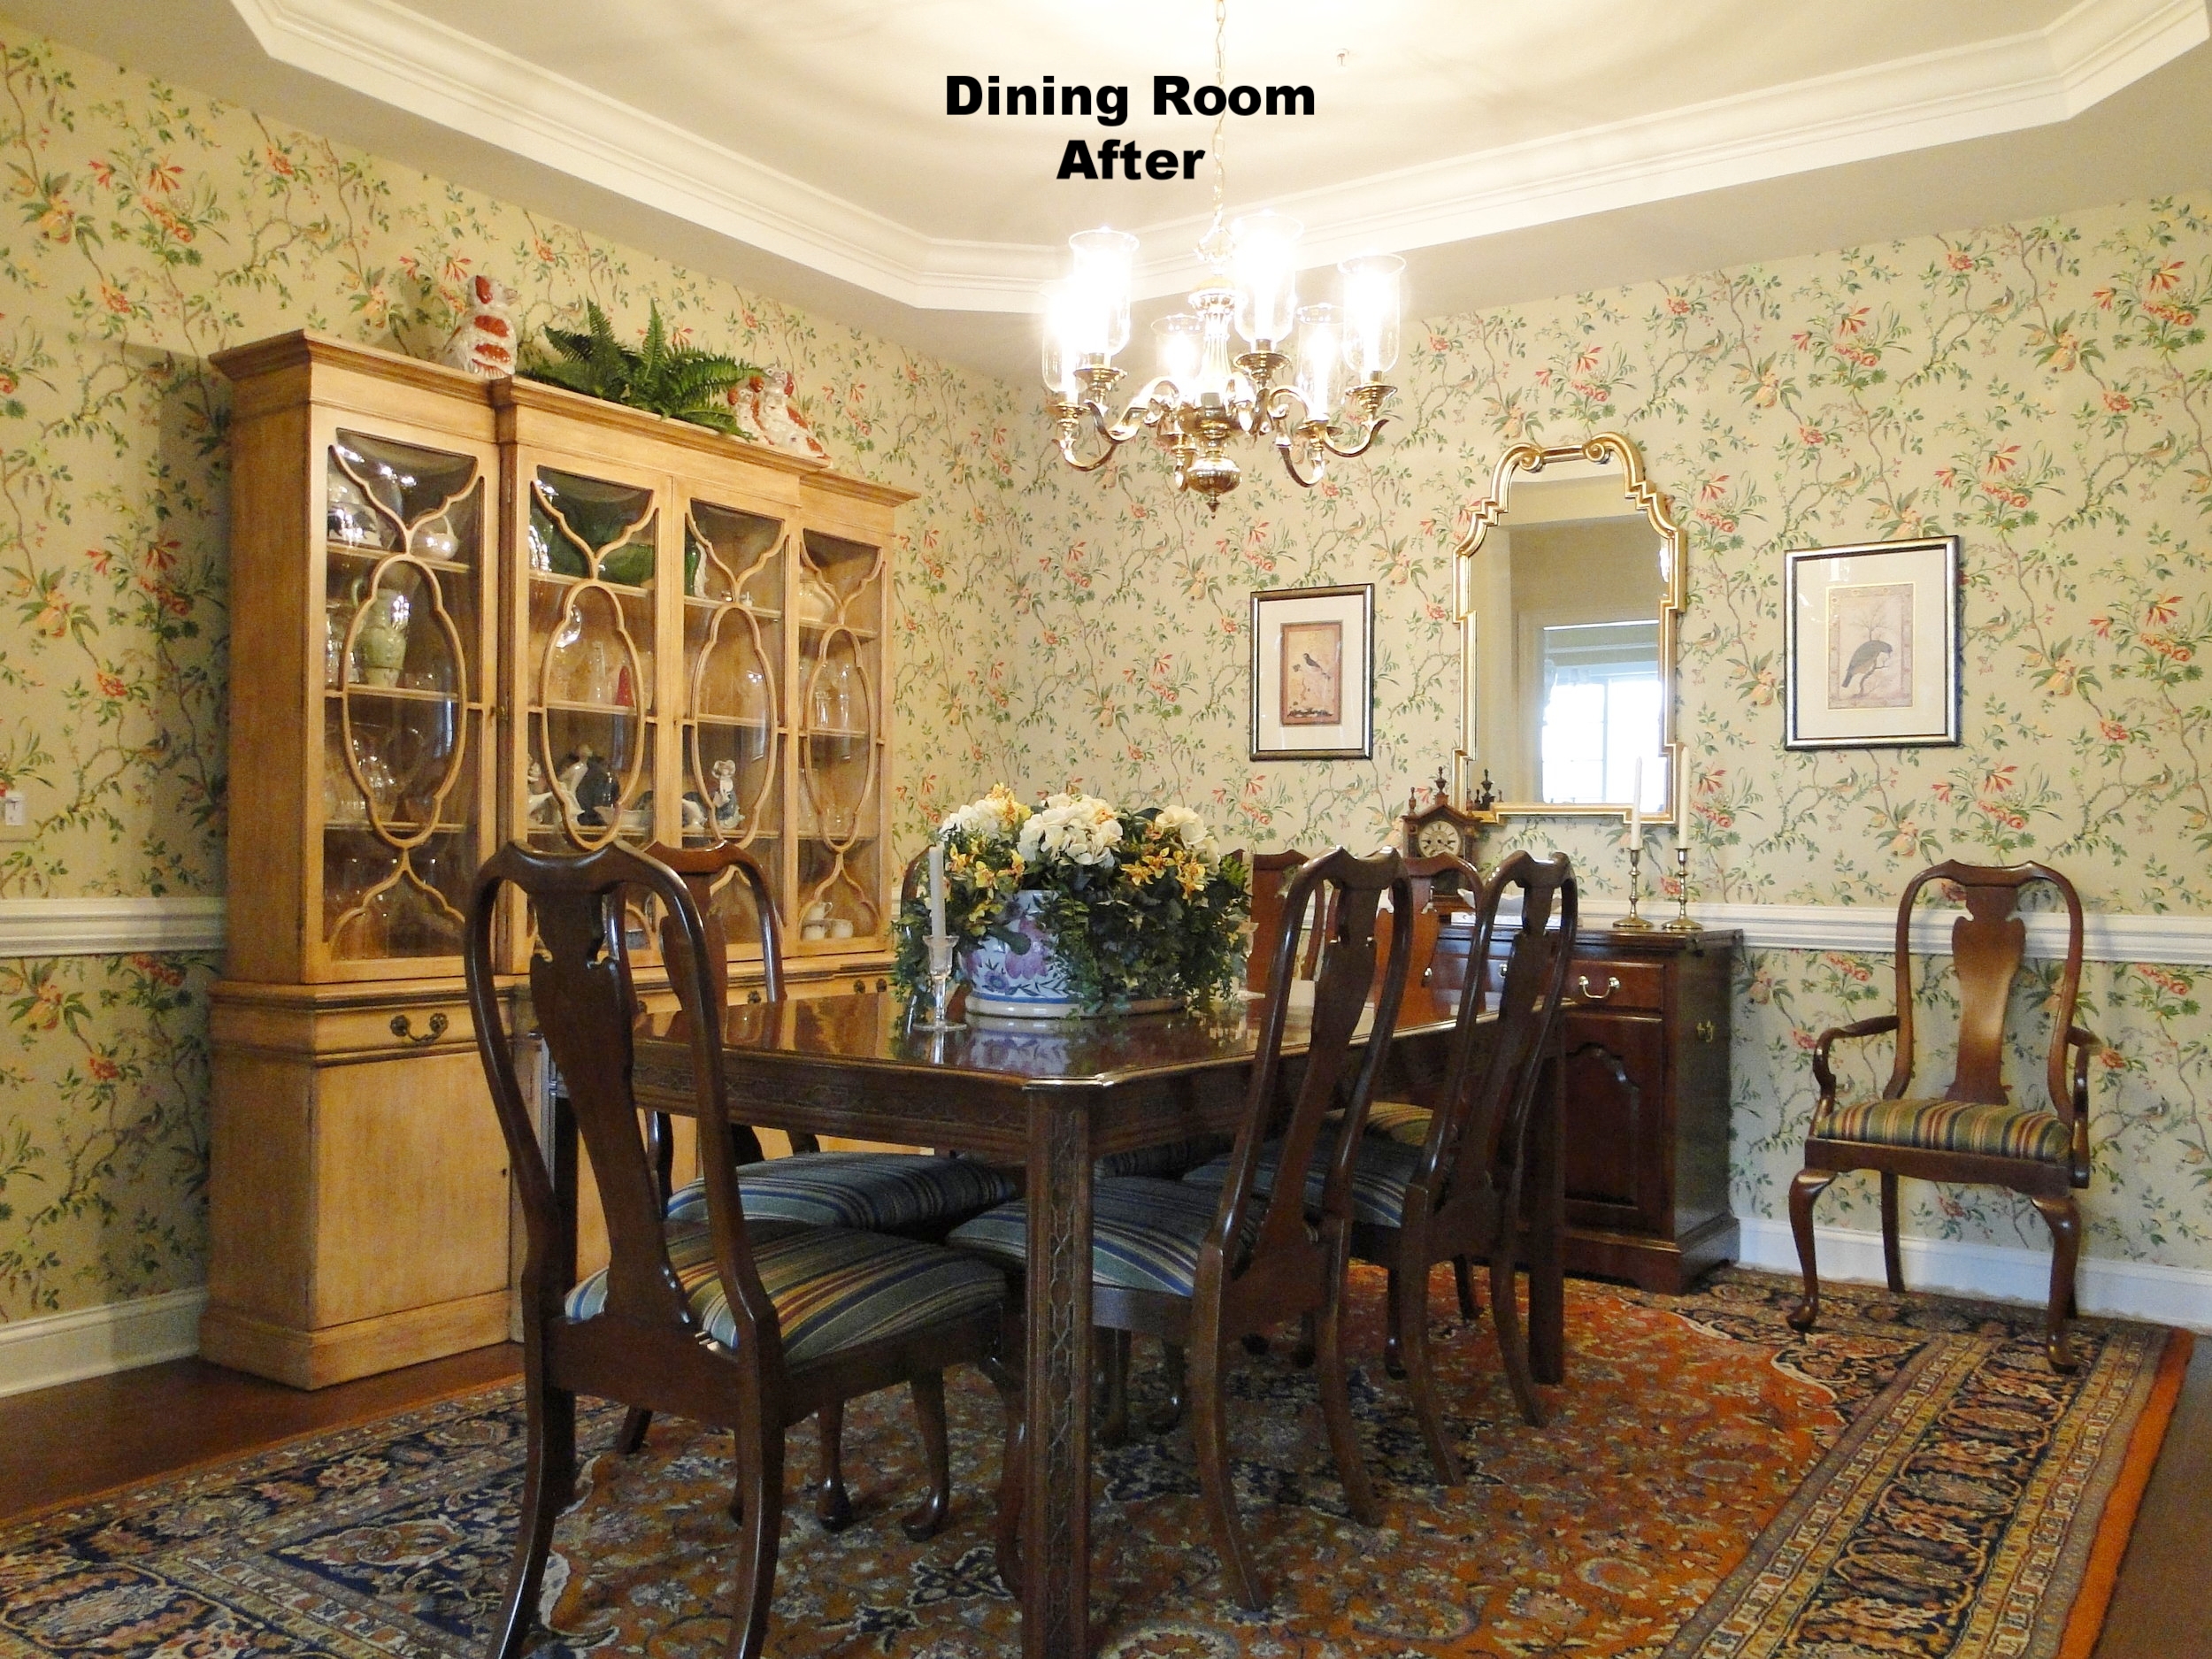 DINING ROOM AFTER 